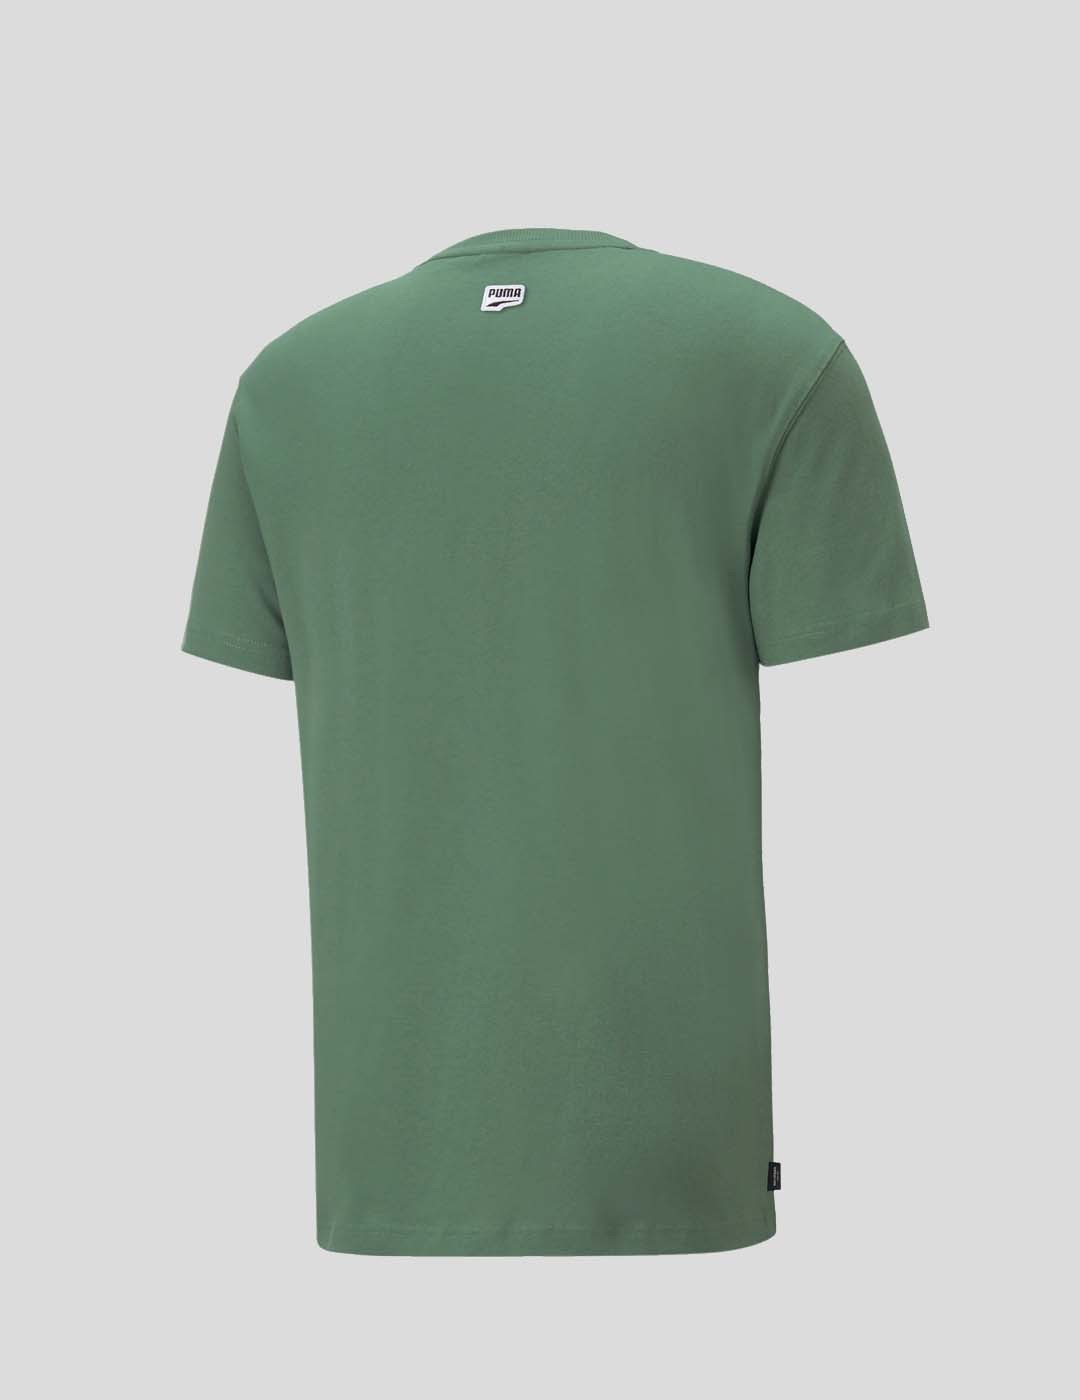 CAMISETA PUMA DOWNTOWN GRAPHIC TEE DEEP FOREST